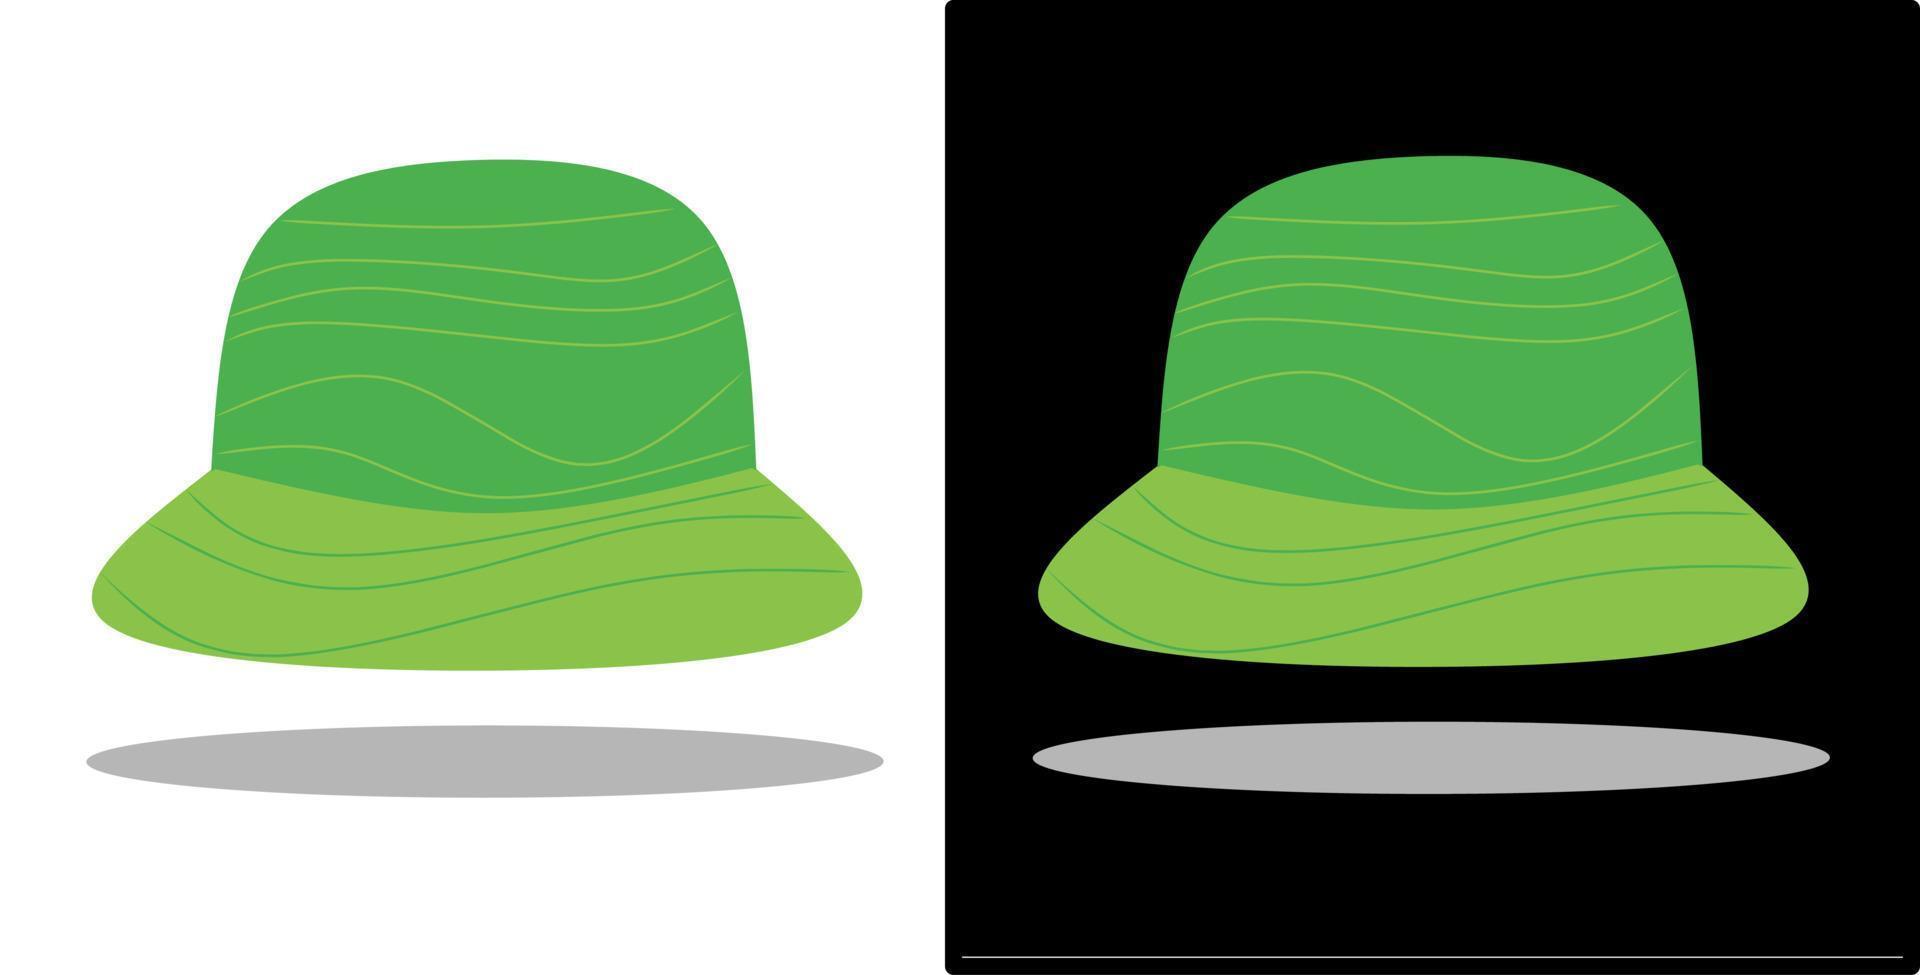 vector illustration of a hat, isolated on a black and white background design